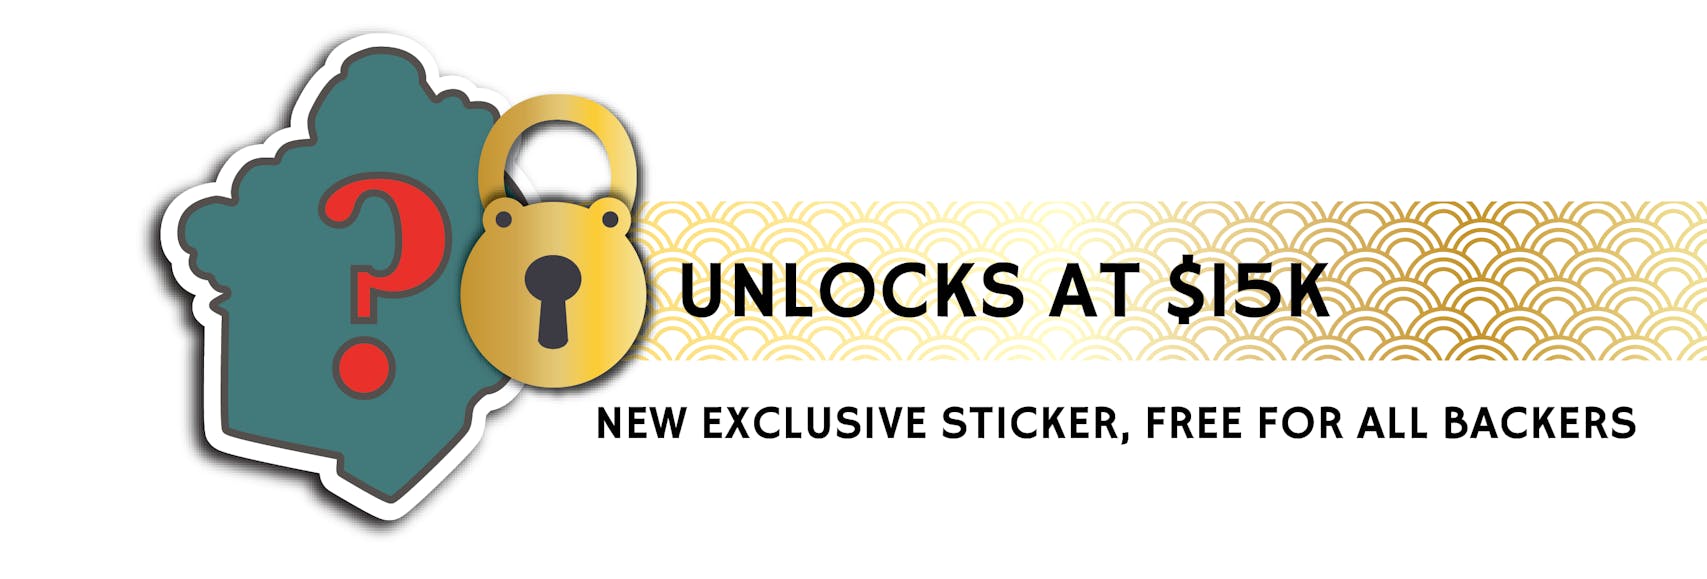 Stretch Goal #5: Unlock a free Sticker for all Backers